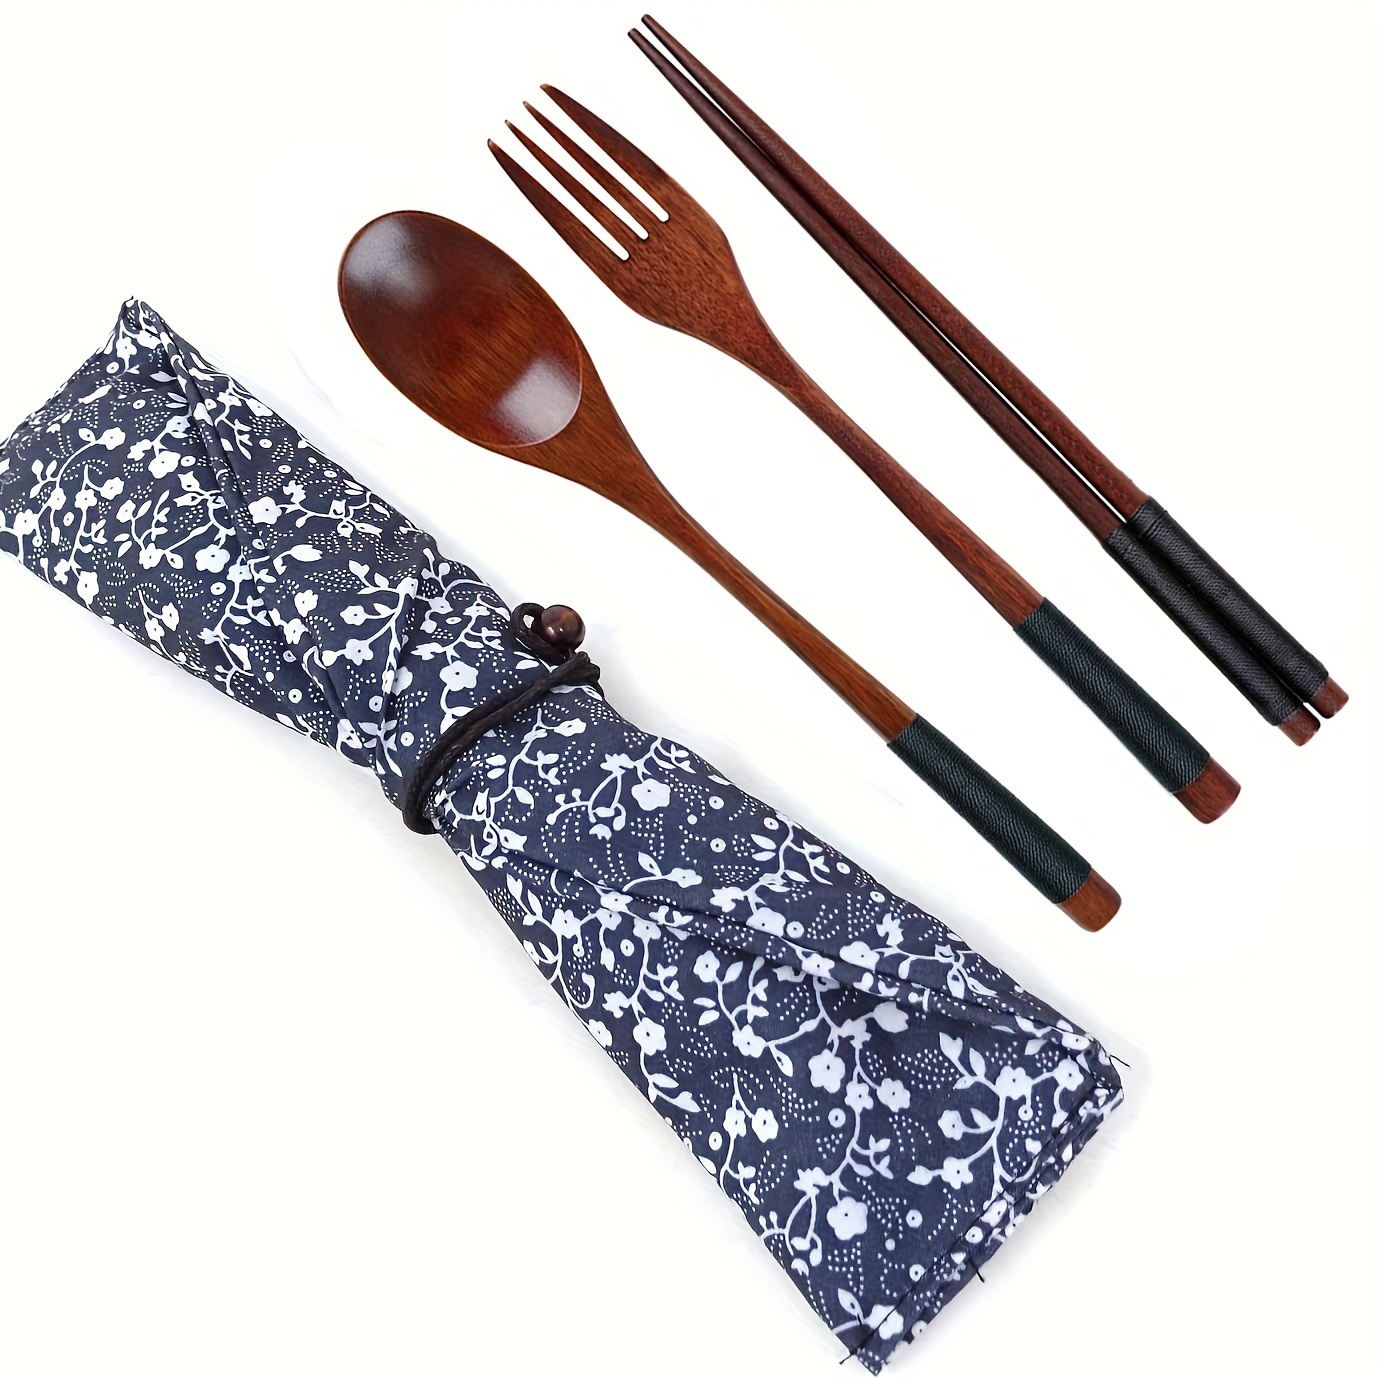 

3pcs Japanese Style Wooden Flatware Set With A Retro Cloth Pouch For Travel, Picnic, Camping Or Just For Daily Use -spoon, Fork, Chopsticks